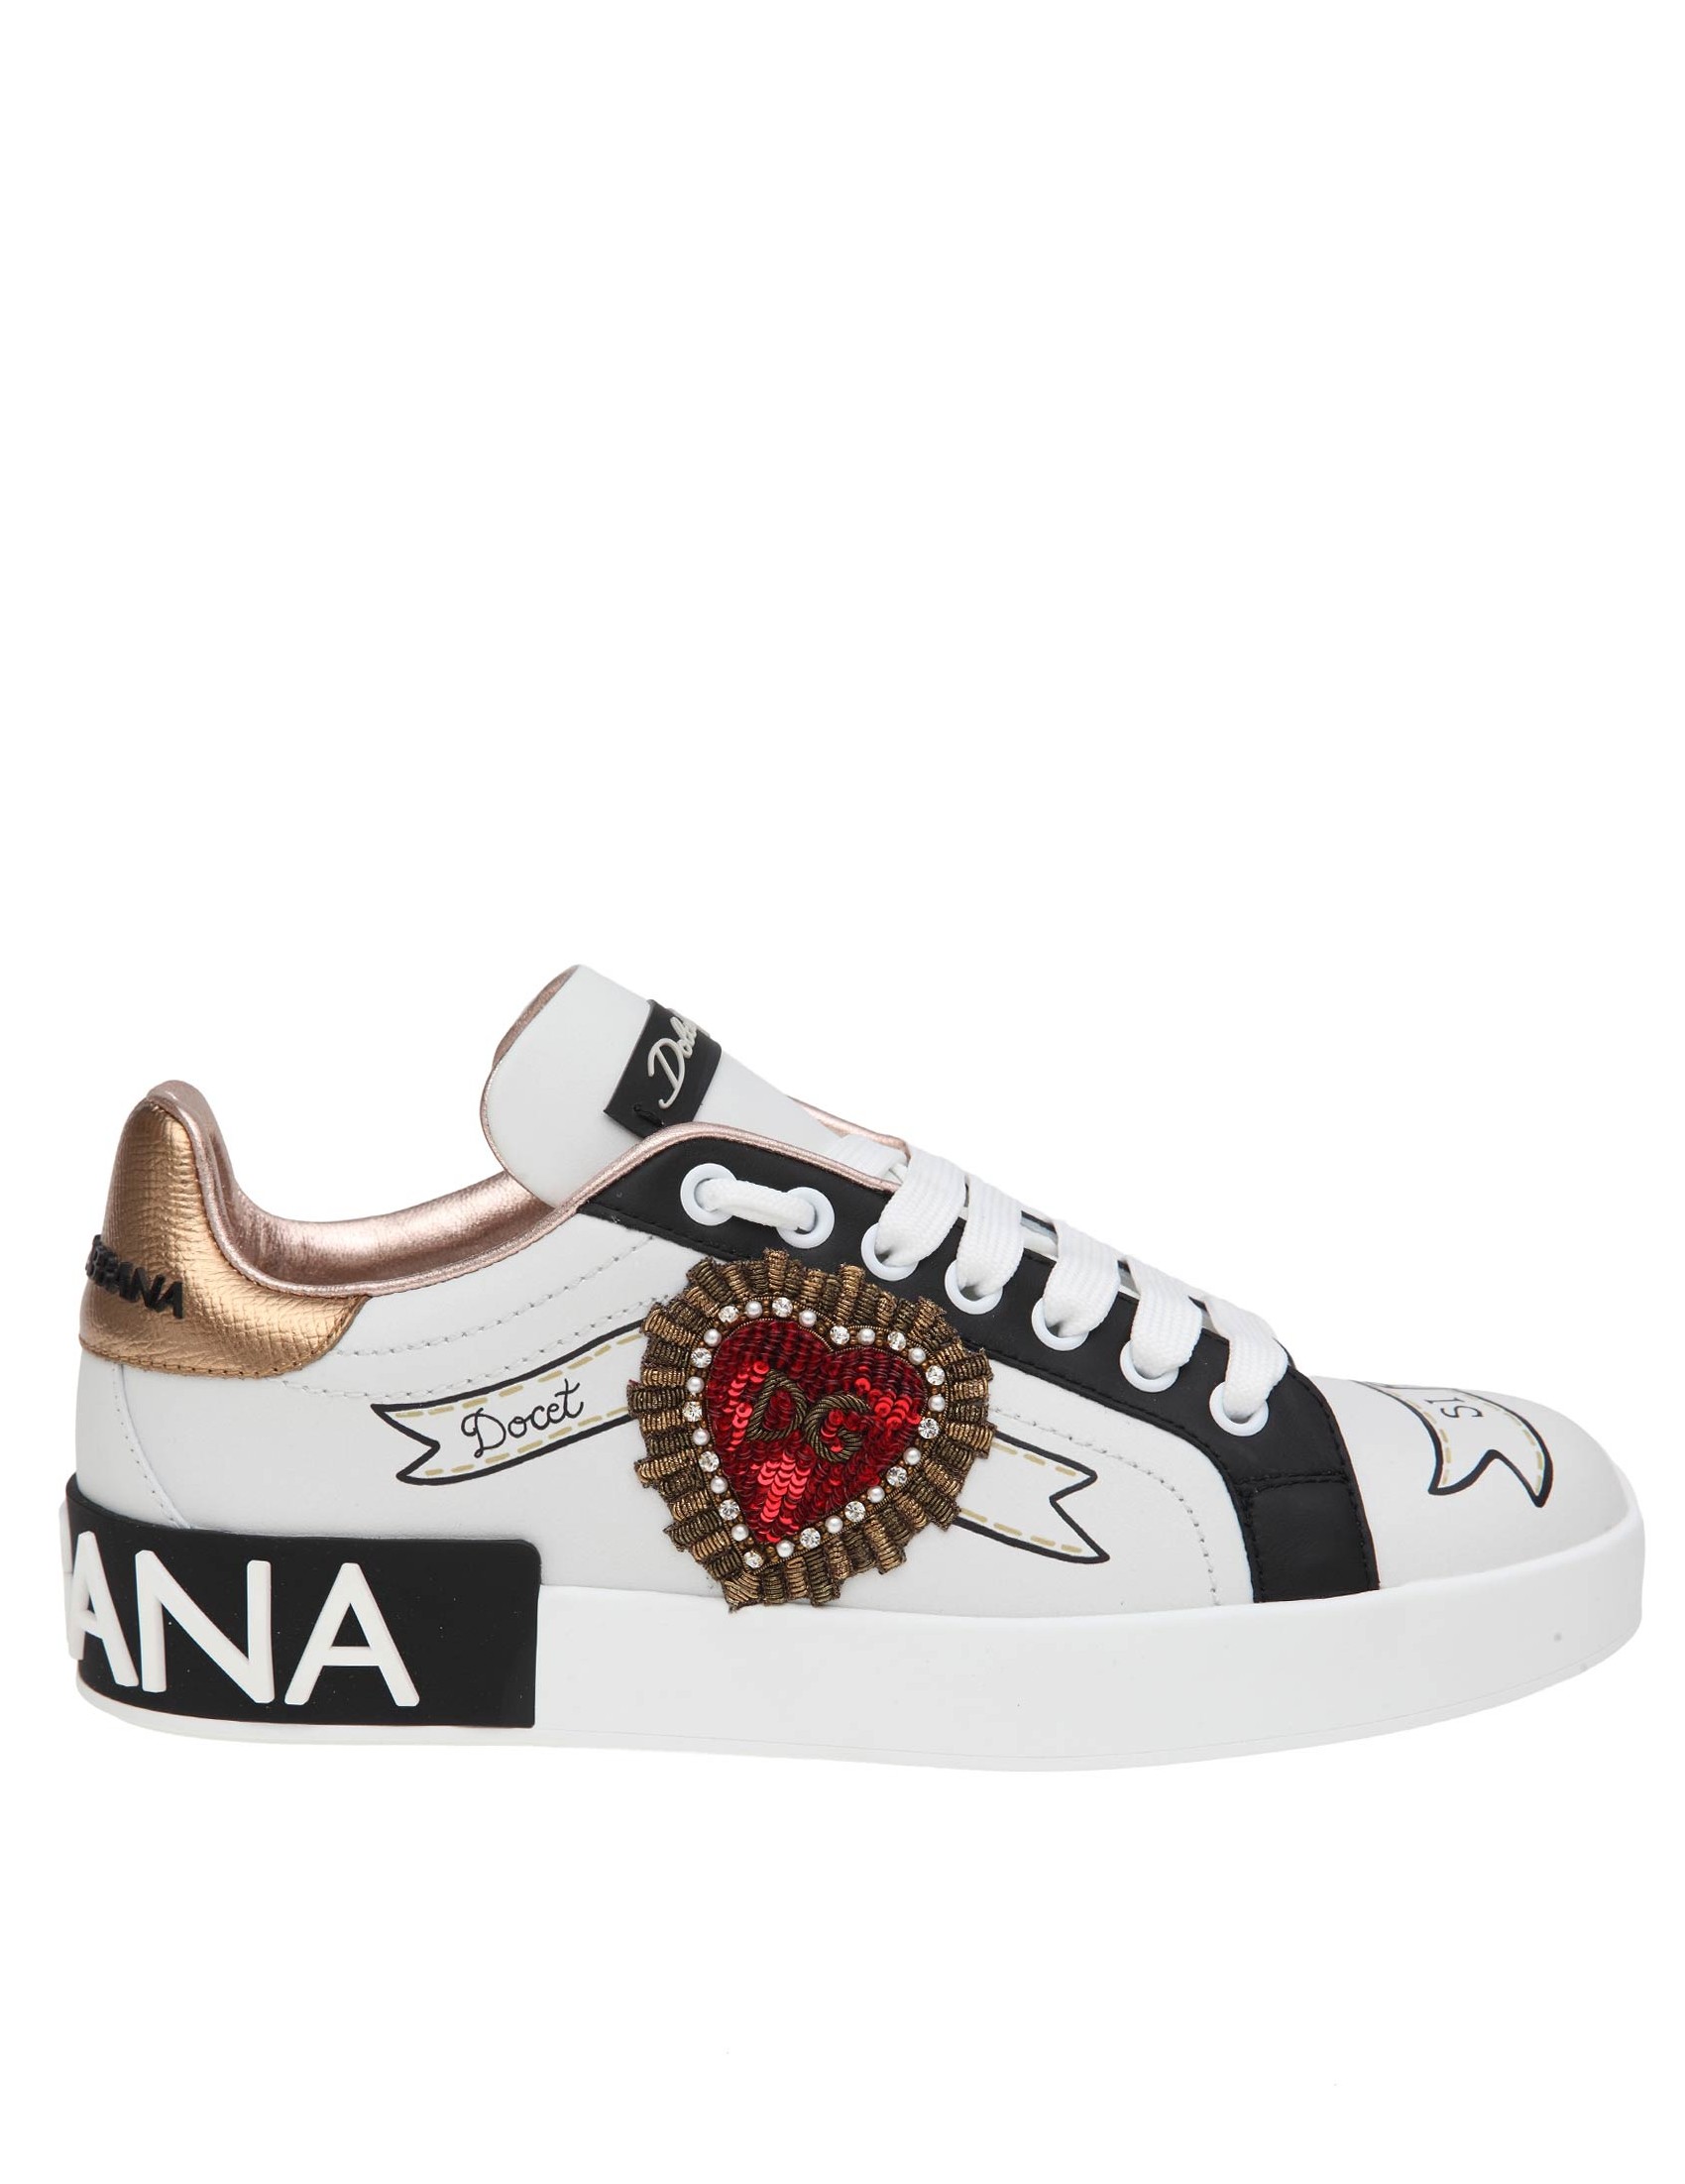 DOLCE & GABBANA PORTOFINO SNEAKERS IN WHITE LEATHER WITH APPLICATIONS